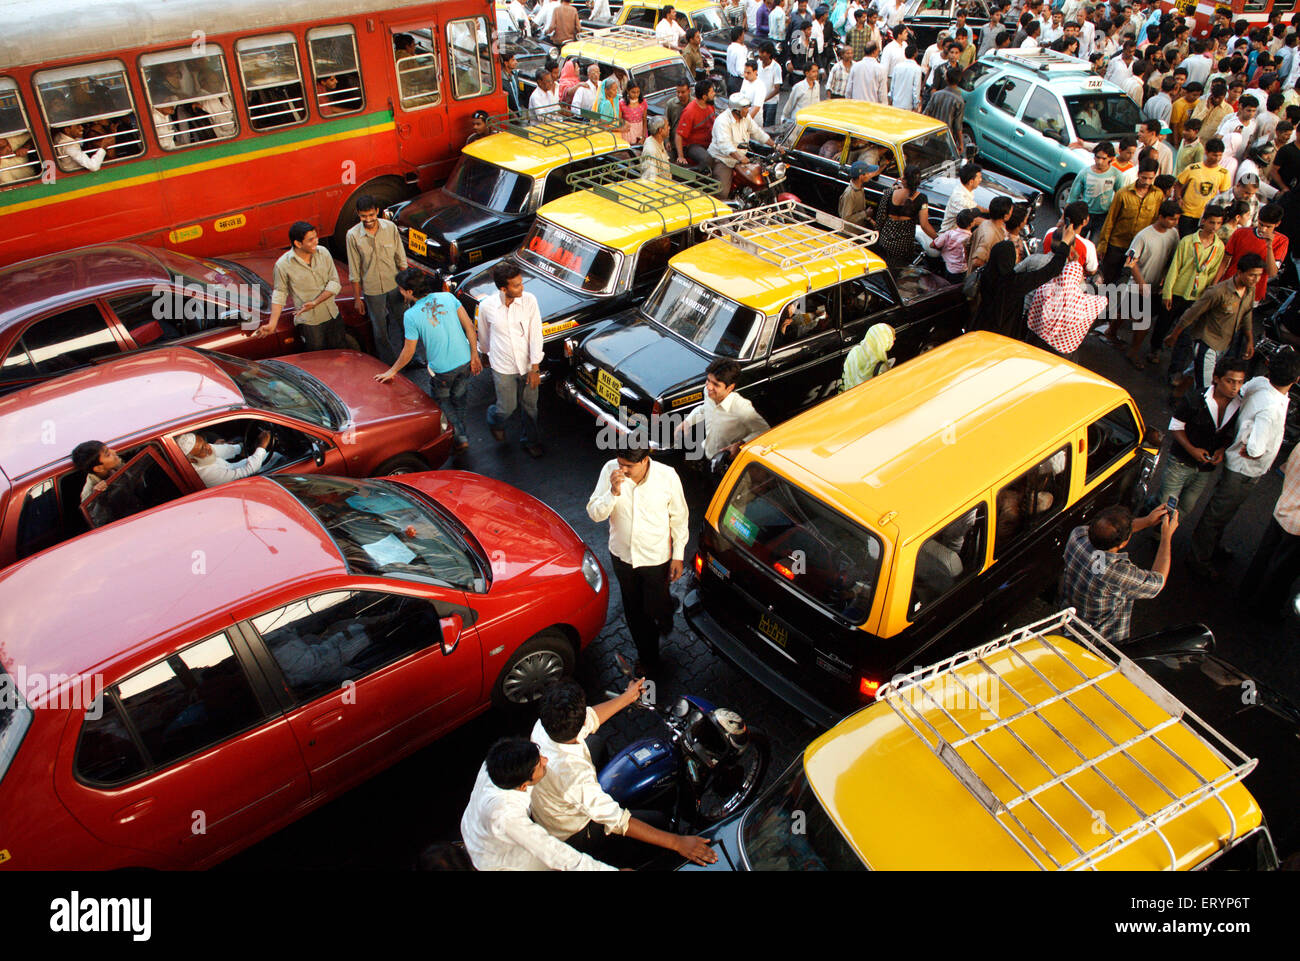 BEST bus taxis cars private taxi stuck in traffic jam in Bombay Mumbai ; Maharashtra ; India Stock Photo